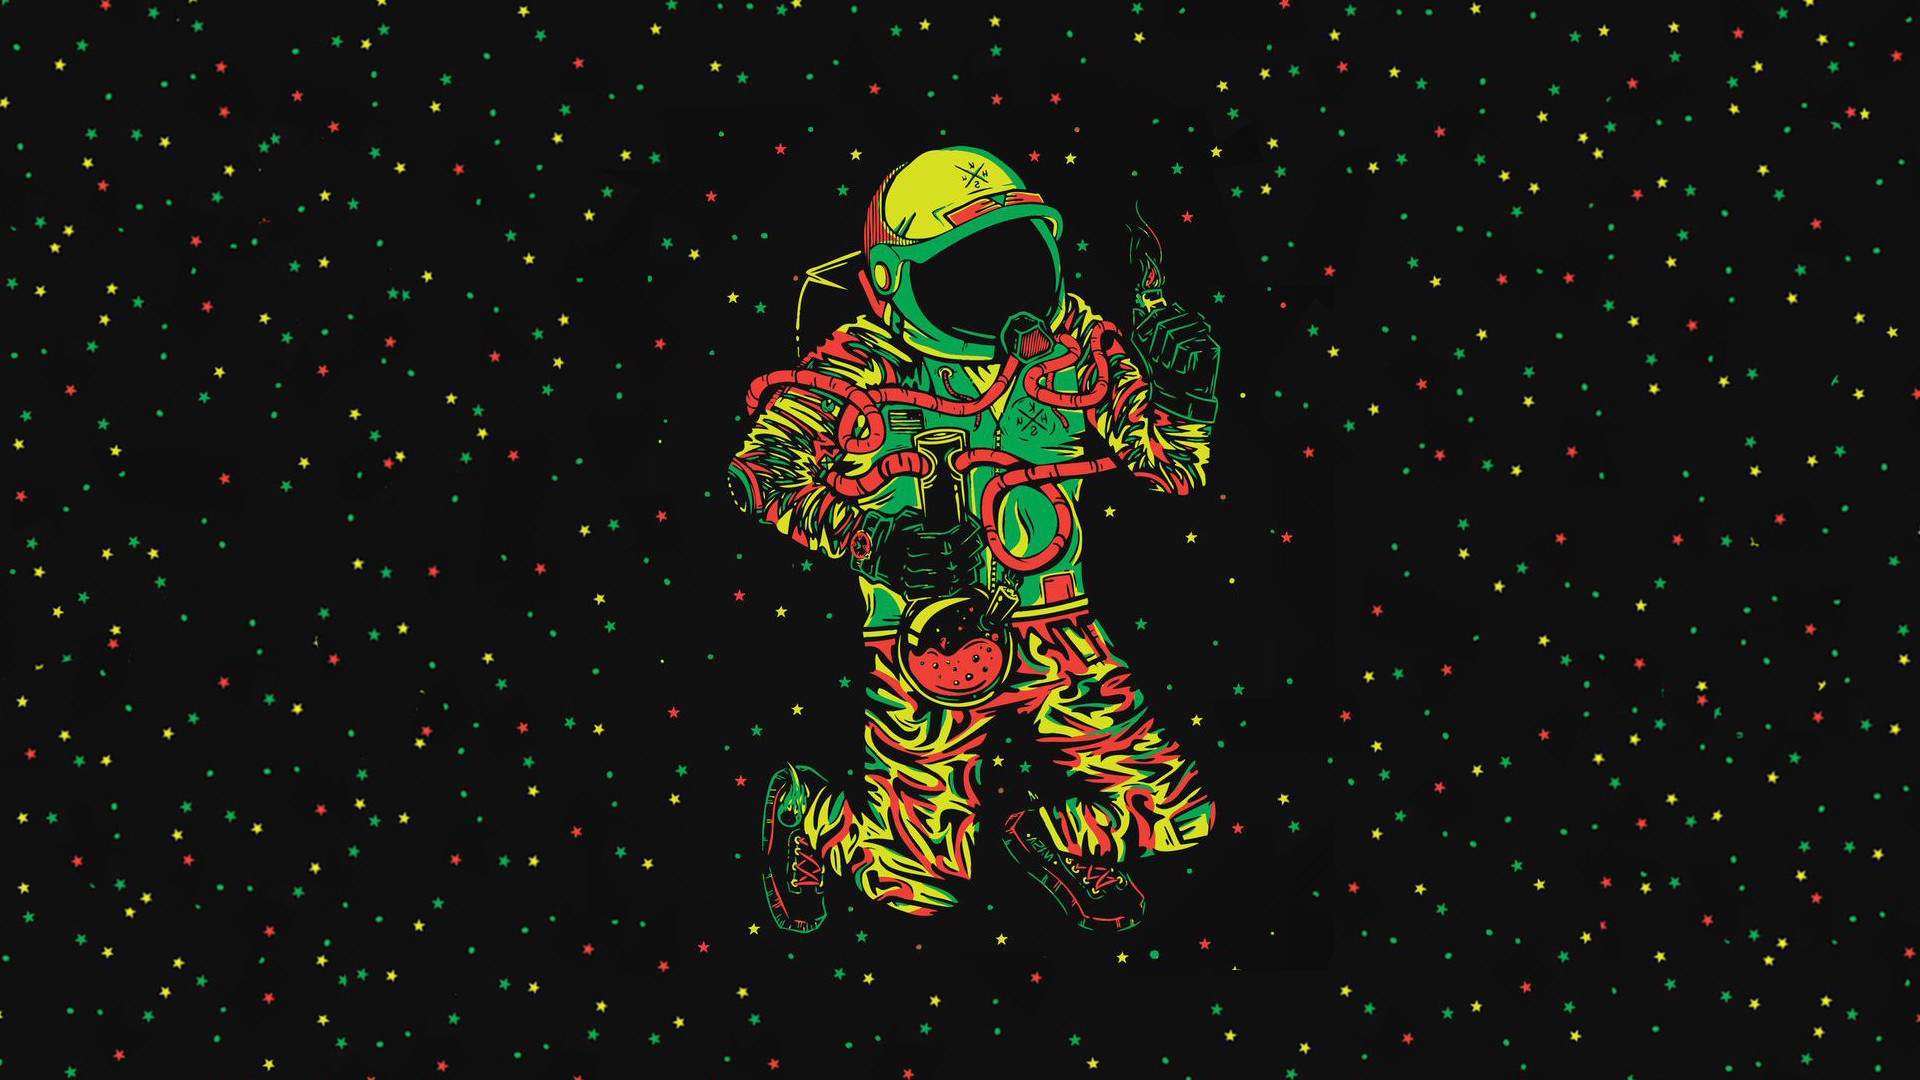 Free Download 66 Hd Astronaut Wallpapers On Wallpaperplay 1920x1080 For Your Desktop Mobile Tablet Explore 28 Spaceman Wallpapers Spaceman Wallpapers